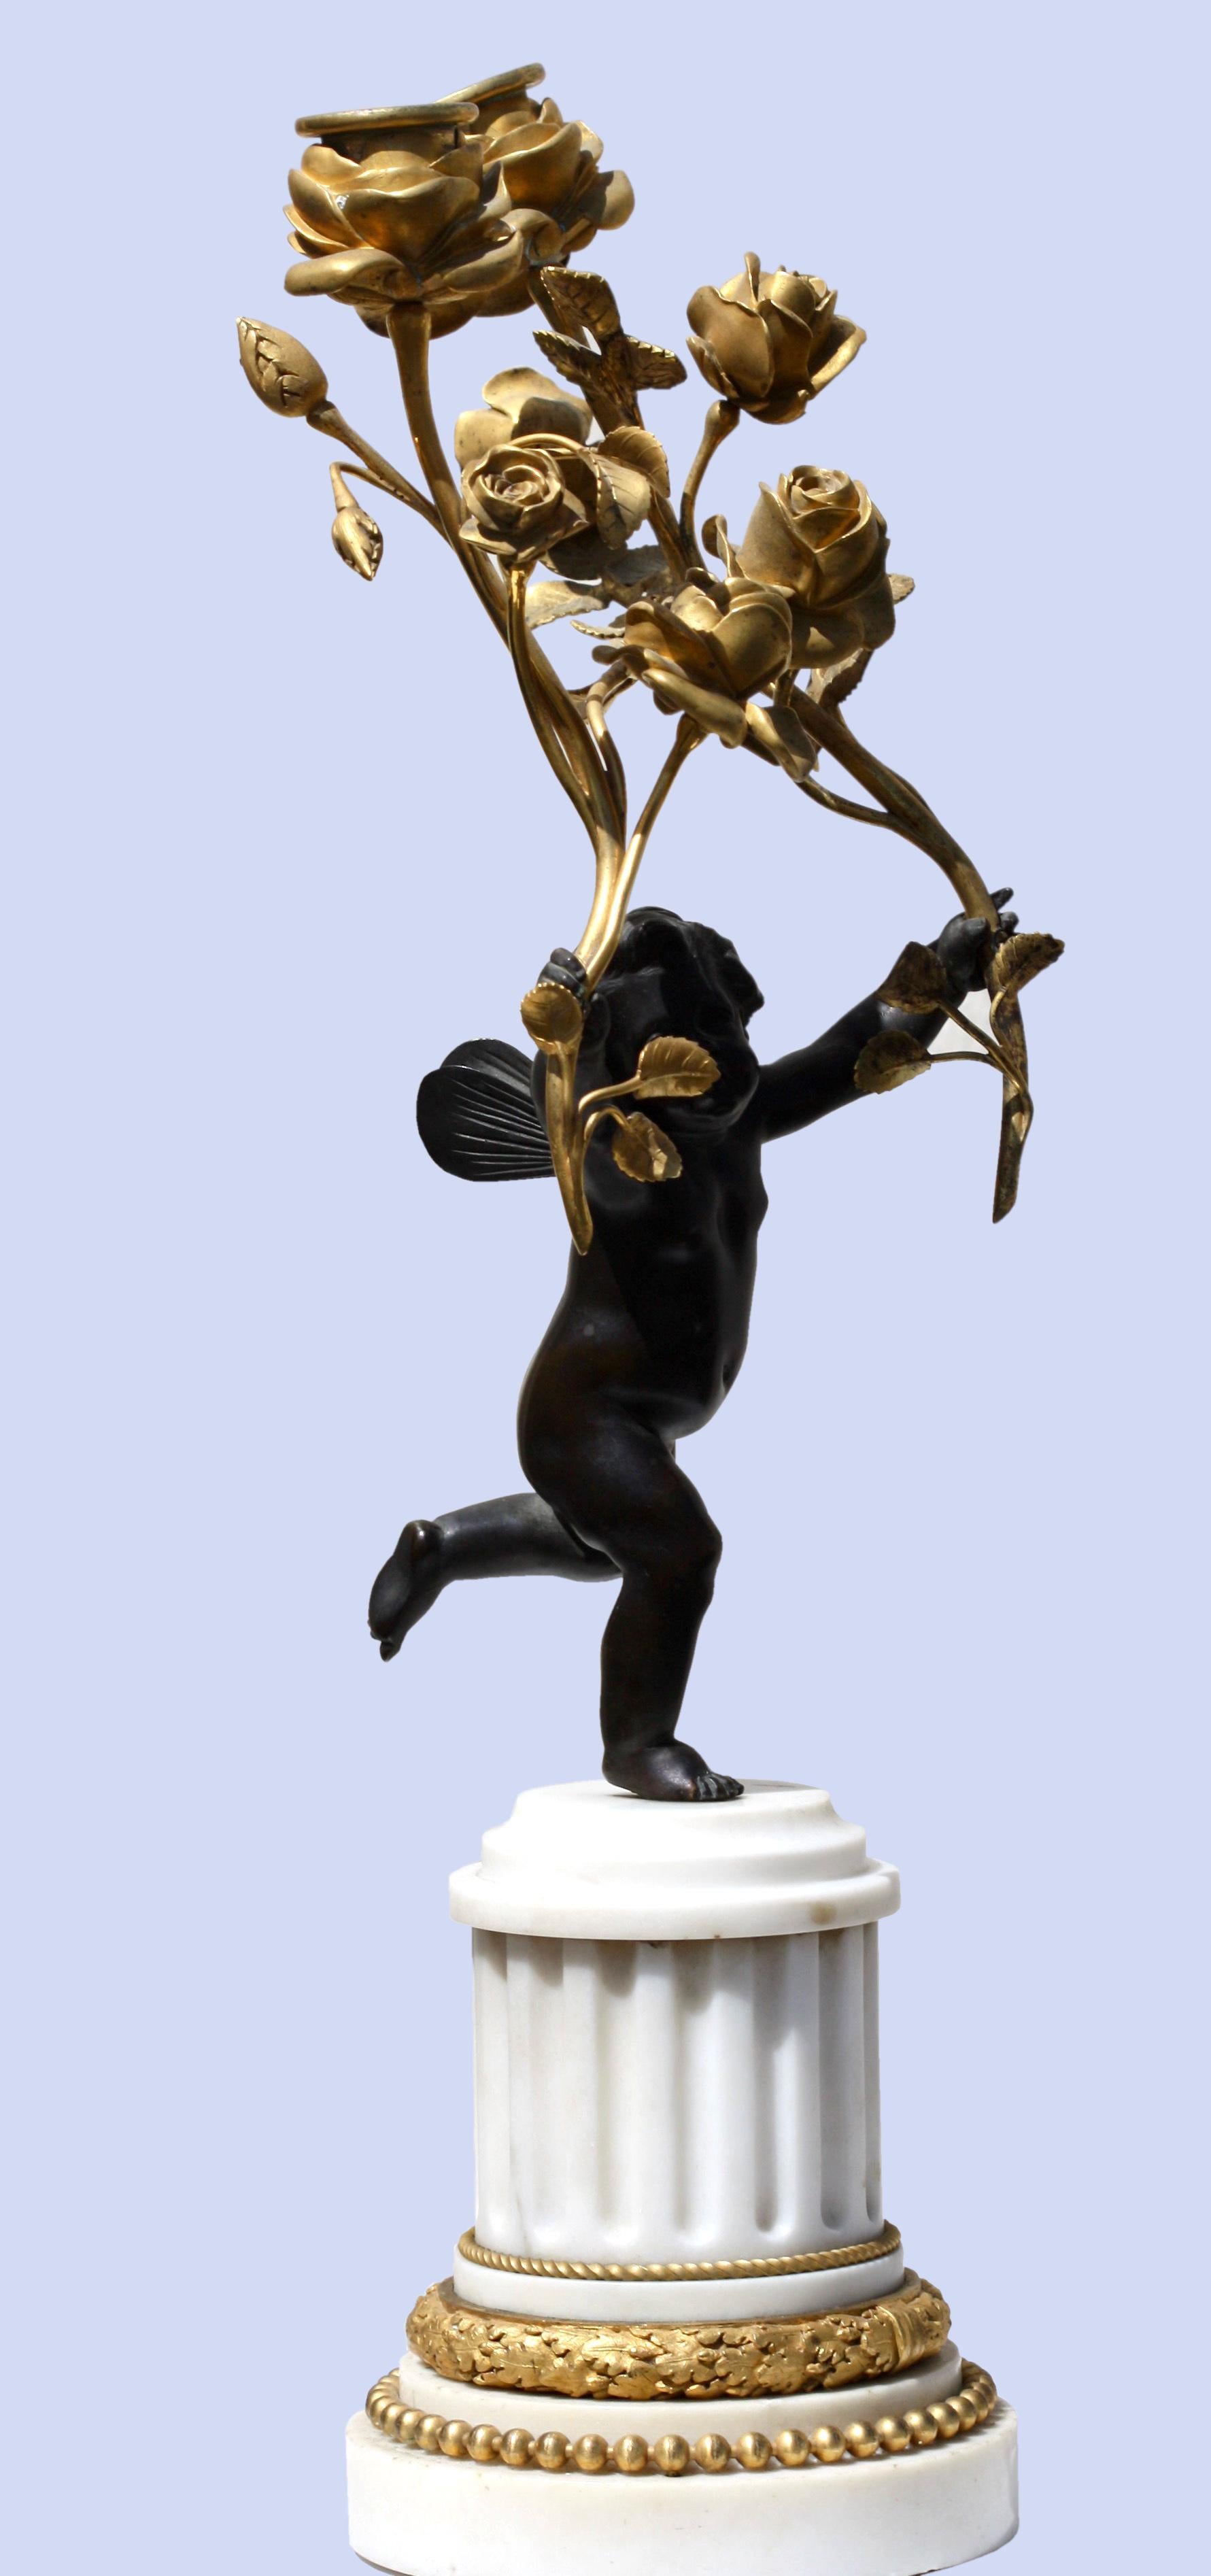 A pair of standing cherub patinated bronze and gilt-bronze figural candelabrum,
after Jean-Baptiste Pigalle
in the form of a cherub supporting two scroll branches, on a white marble columnar base, 
Measures: Height 17.25, (43.81 cm.), width 9